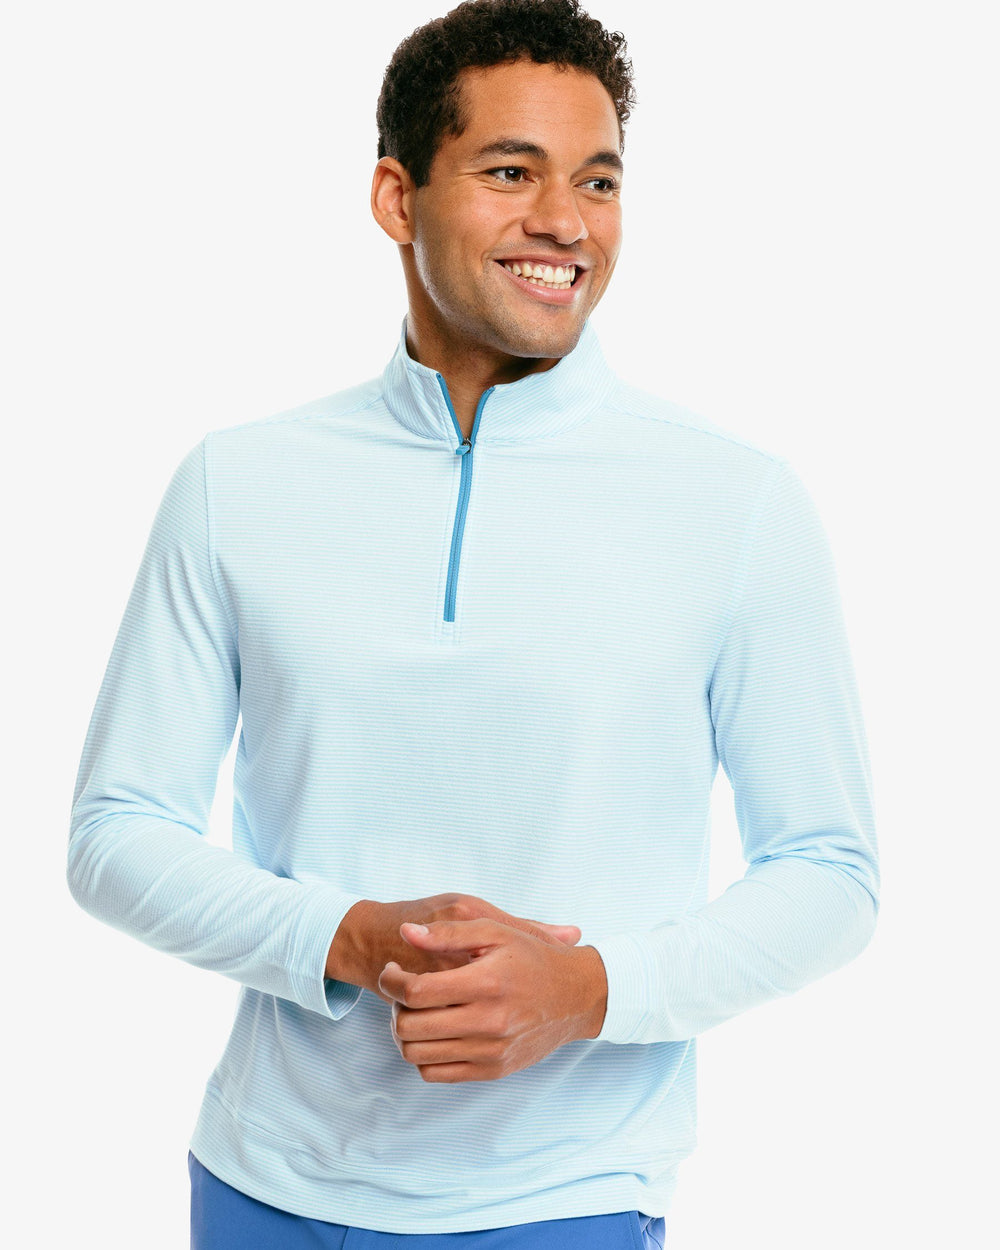 The front of the Men's Cruiser Heather Micro Striped Performance Quarter Zip Pullover by Southern Tide - Heather Aquamarine